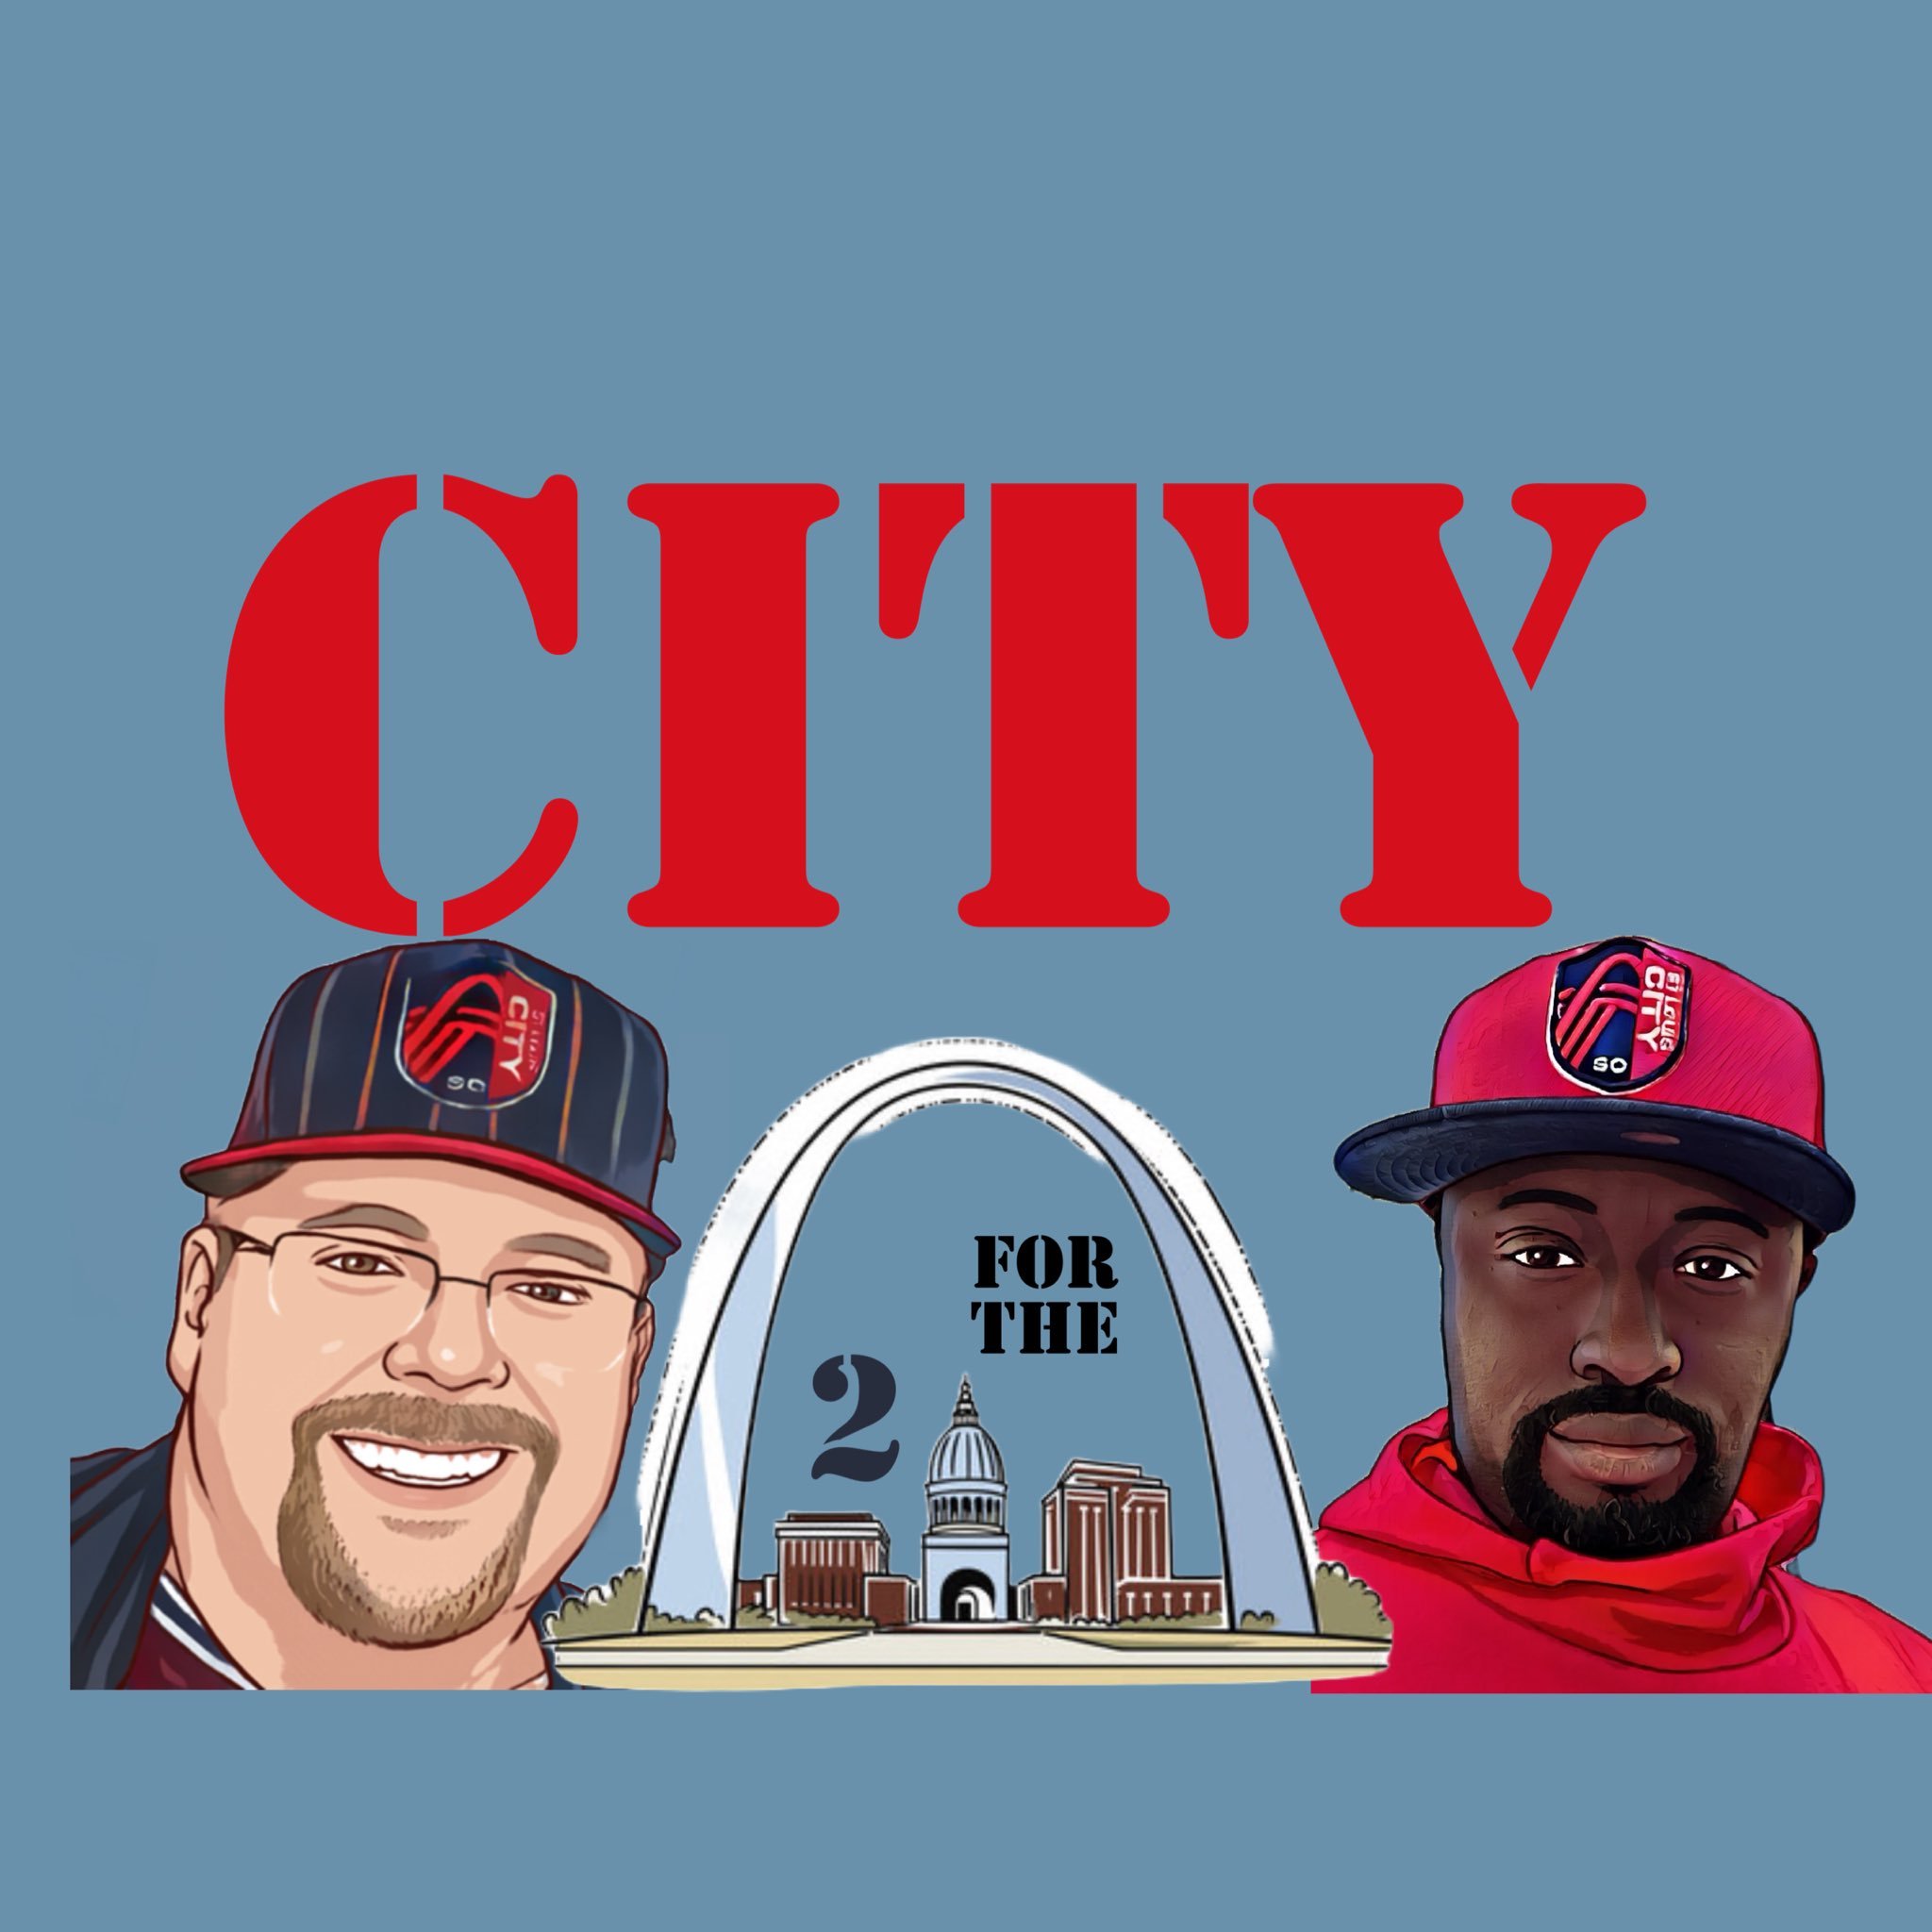 Artwork for 2 for the CITY